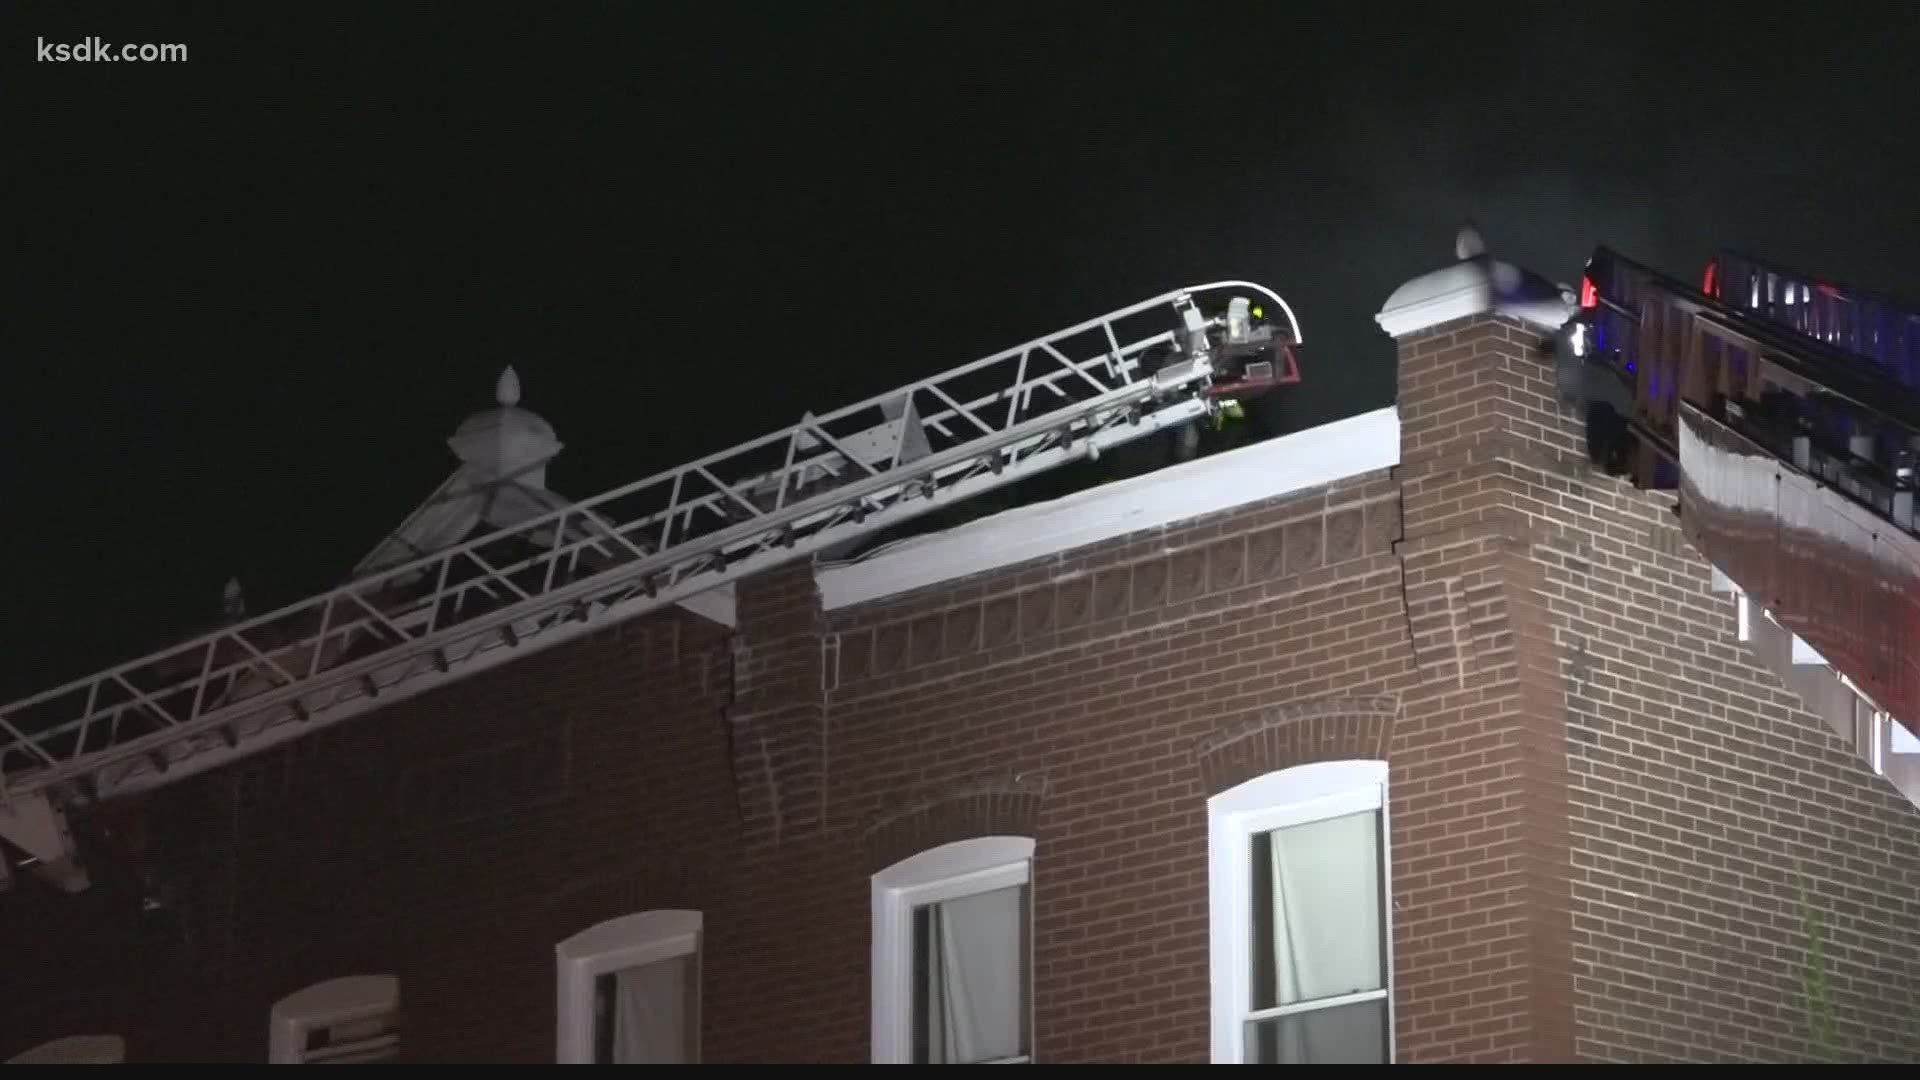 “This was a quick-moving fire that started on the first floor and went up pretty quickly,” St. Louis Fire Chief Dennis Jenkerson said at the scene.